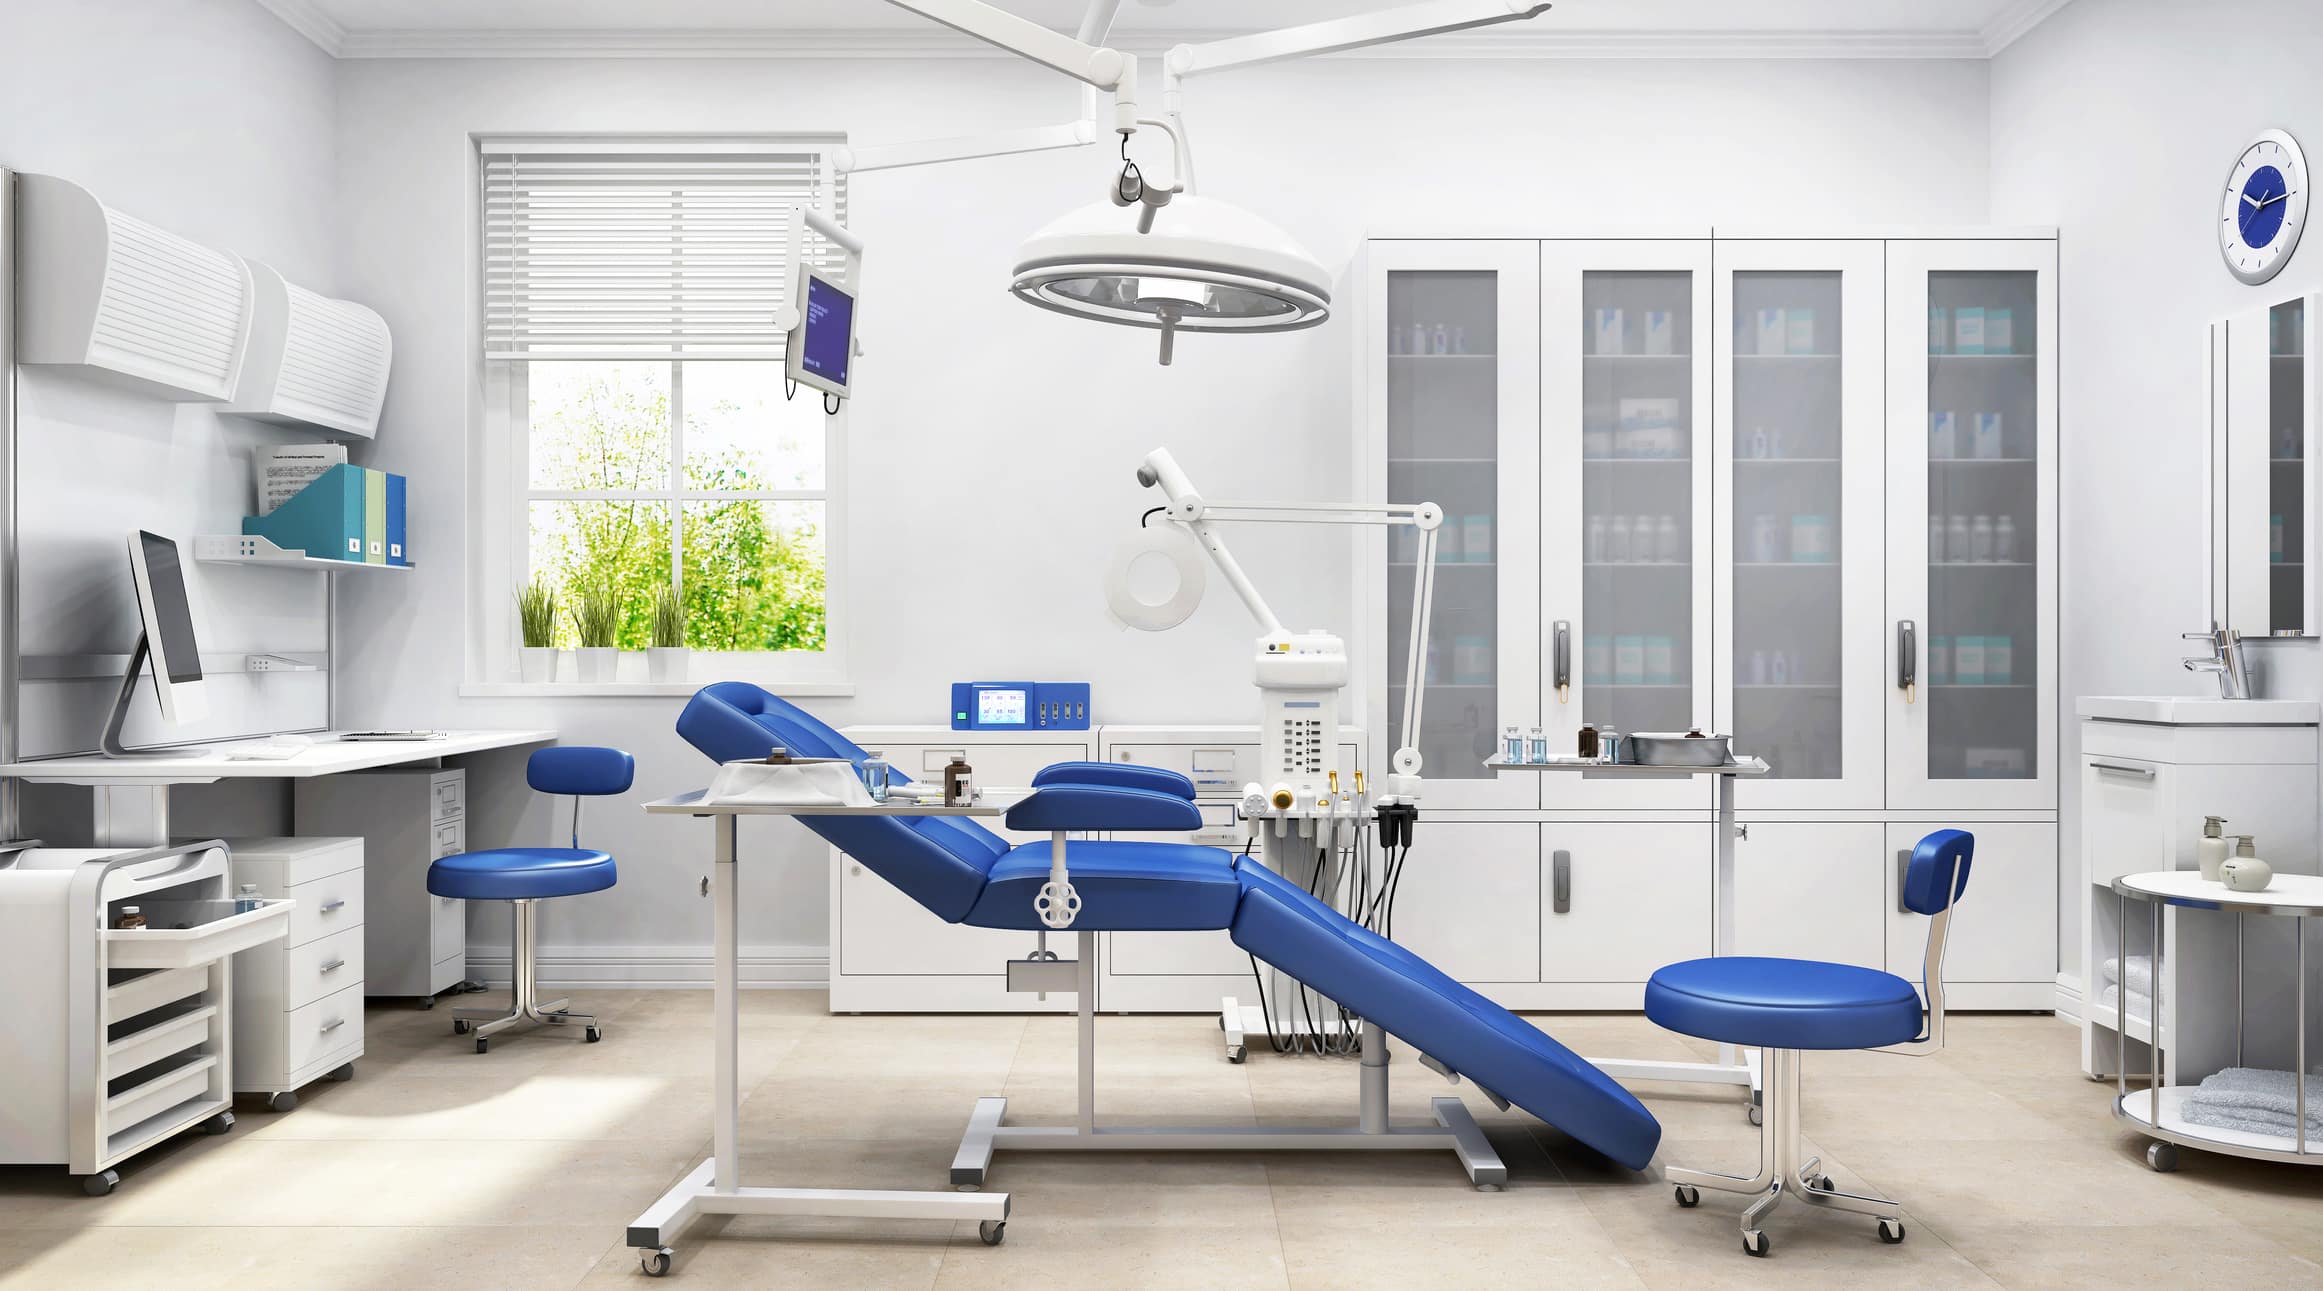 Clinic Furniture, including treatment tables, stools and more.